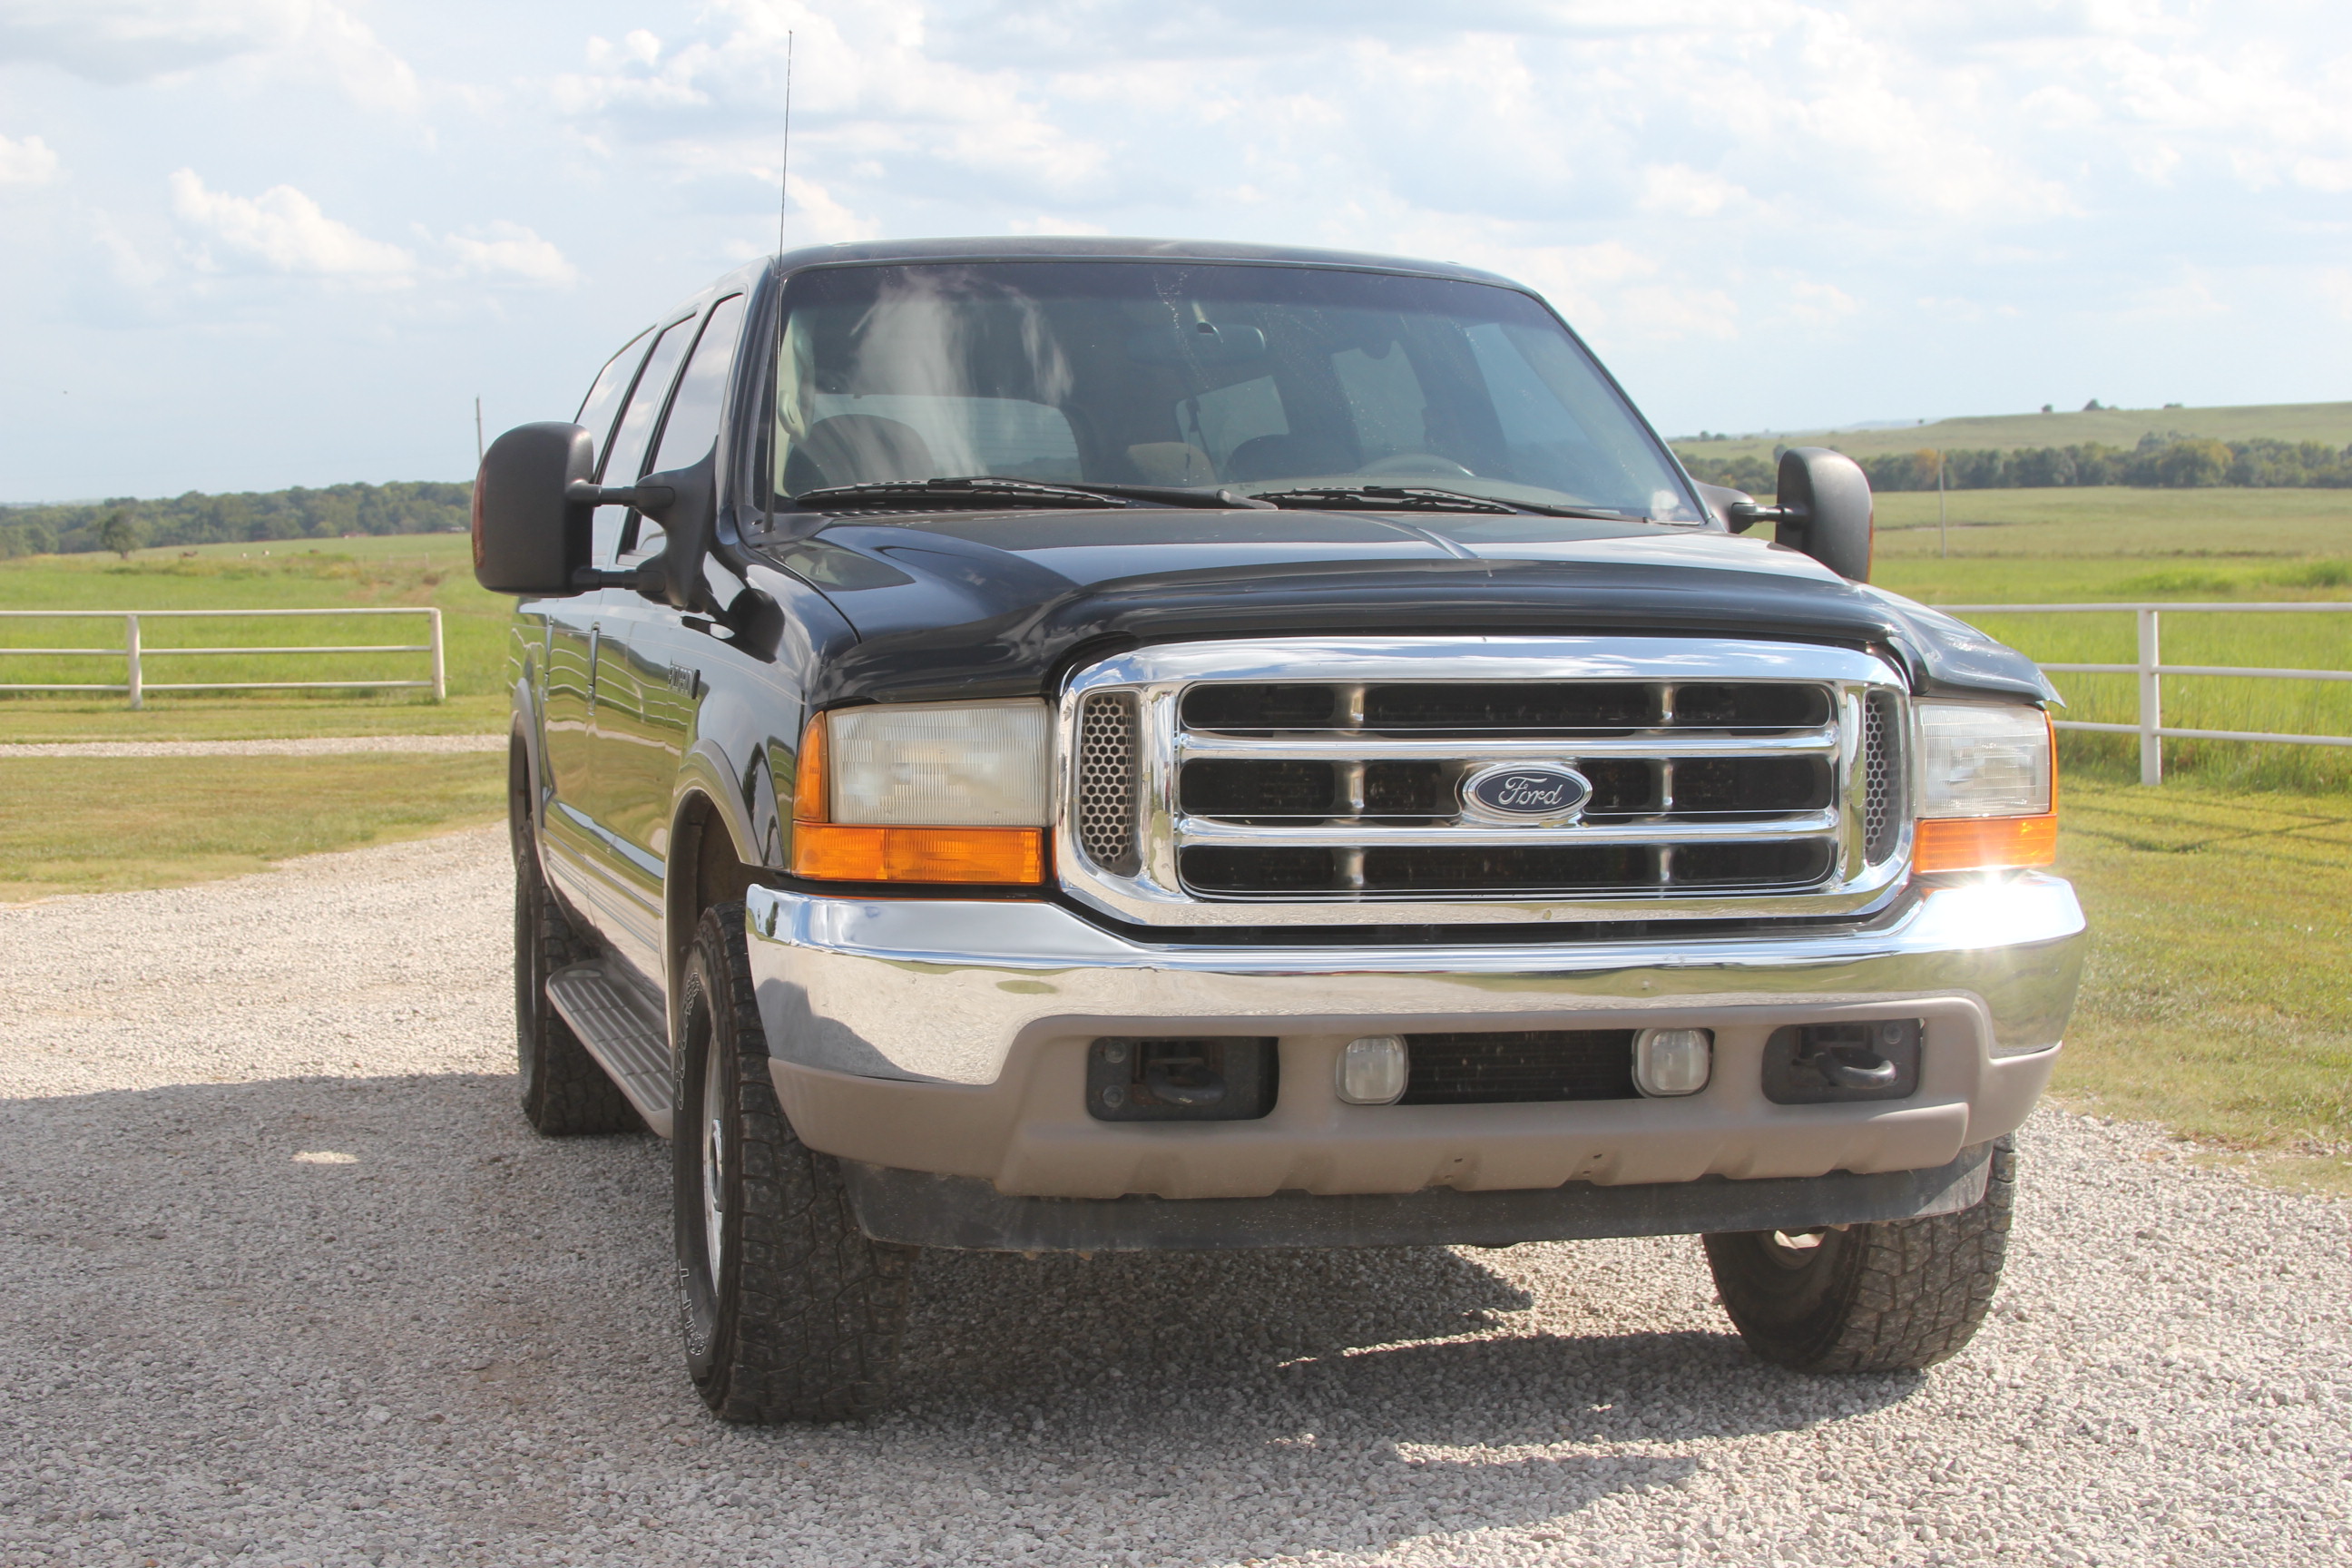 2001 ford excursion for sale 7.3